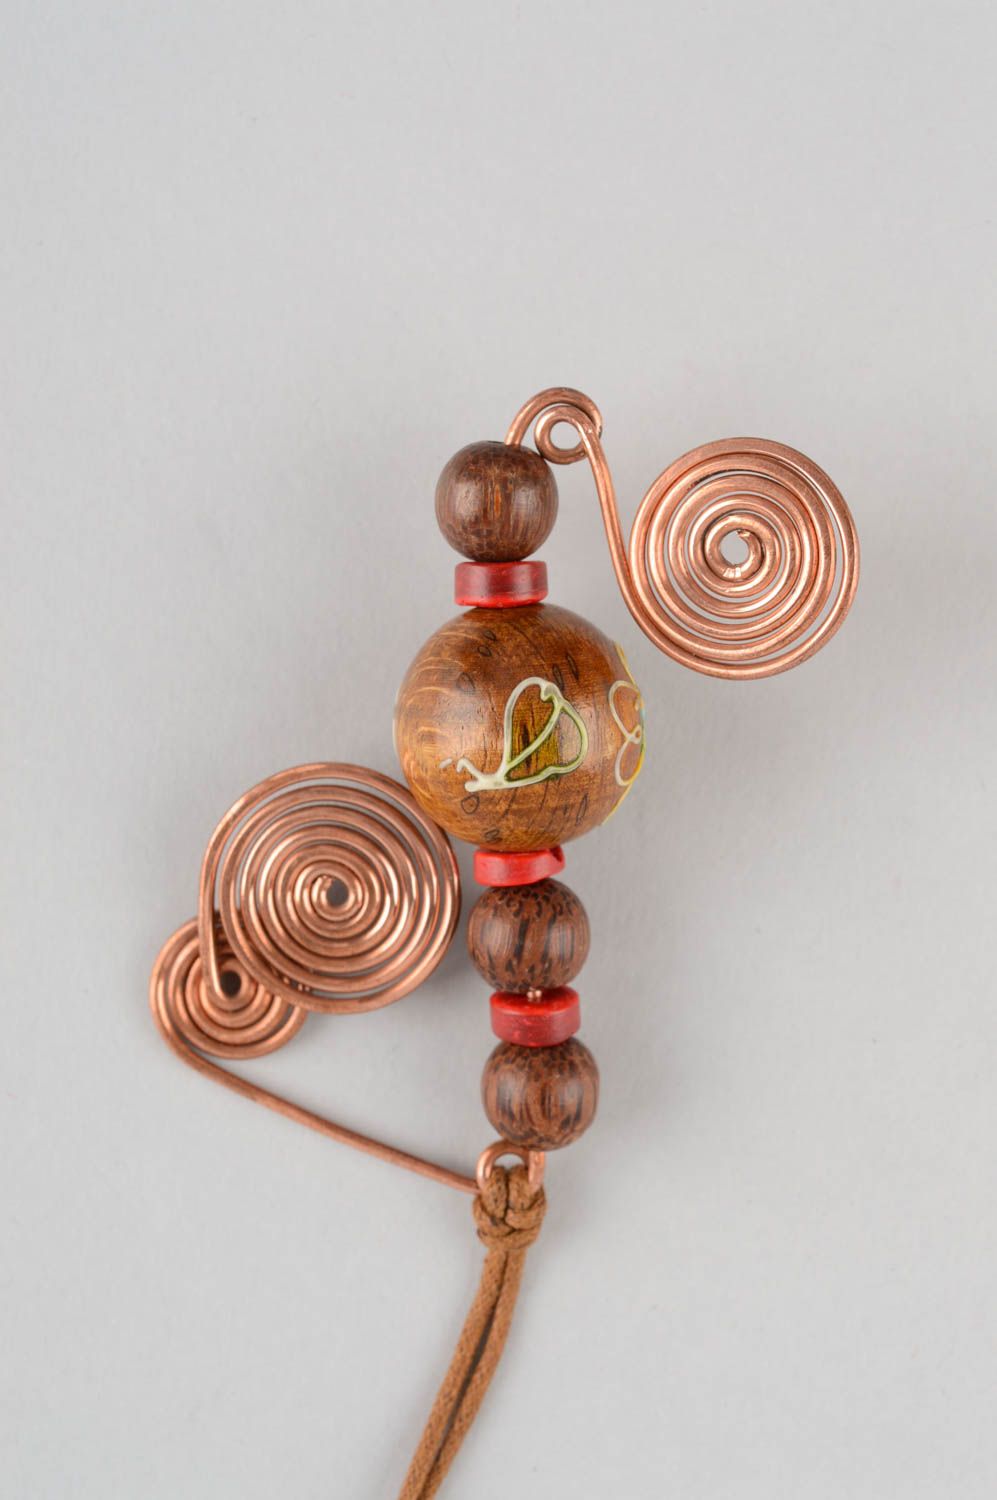 Handmade designer copper wire pendant with wooden beads on cord women accessory photo 3